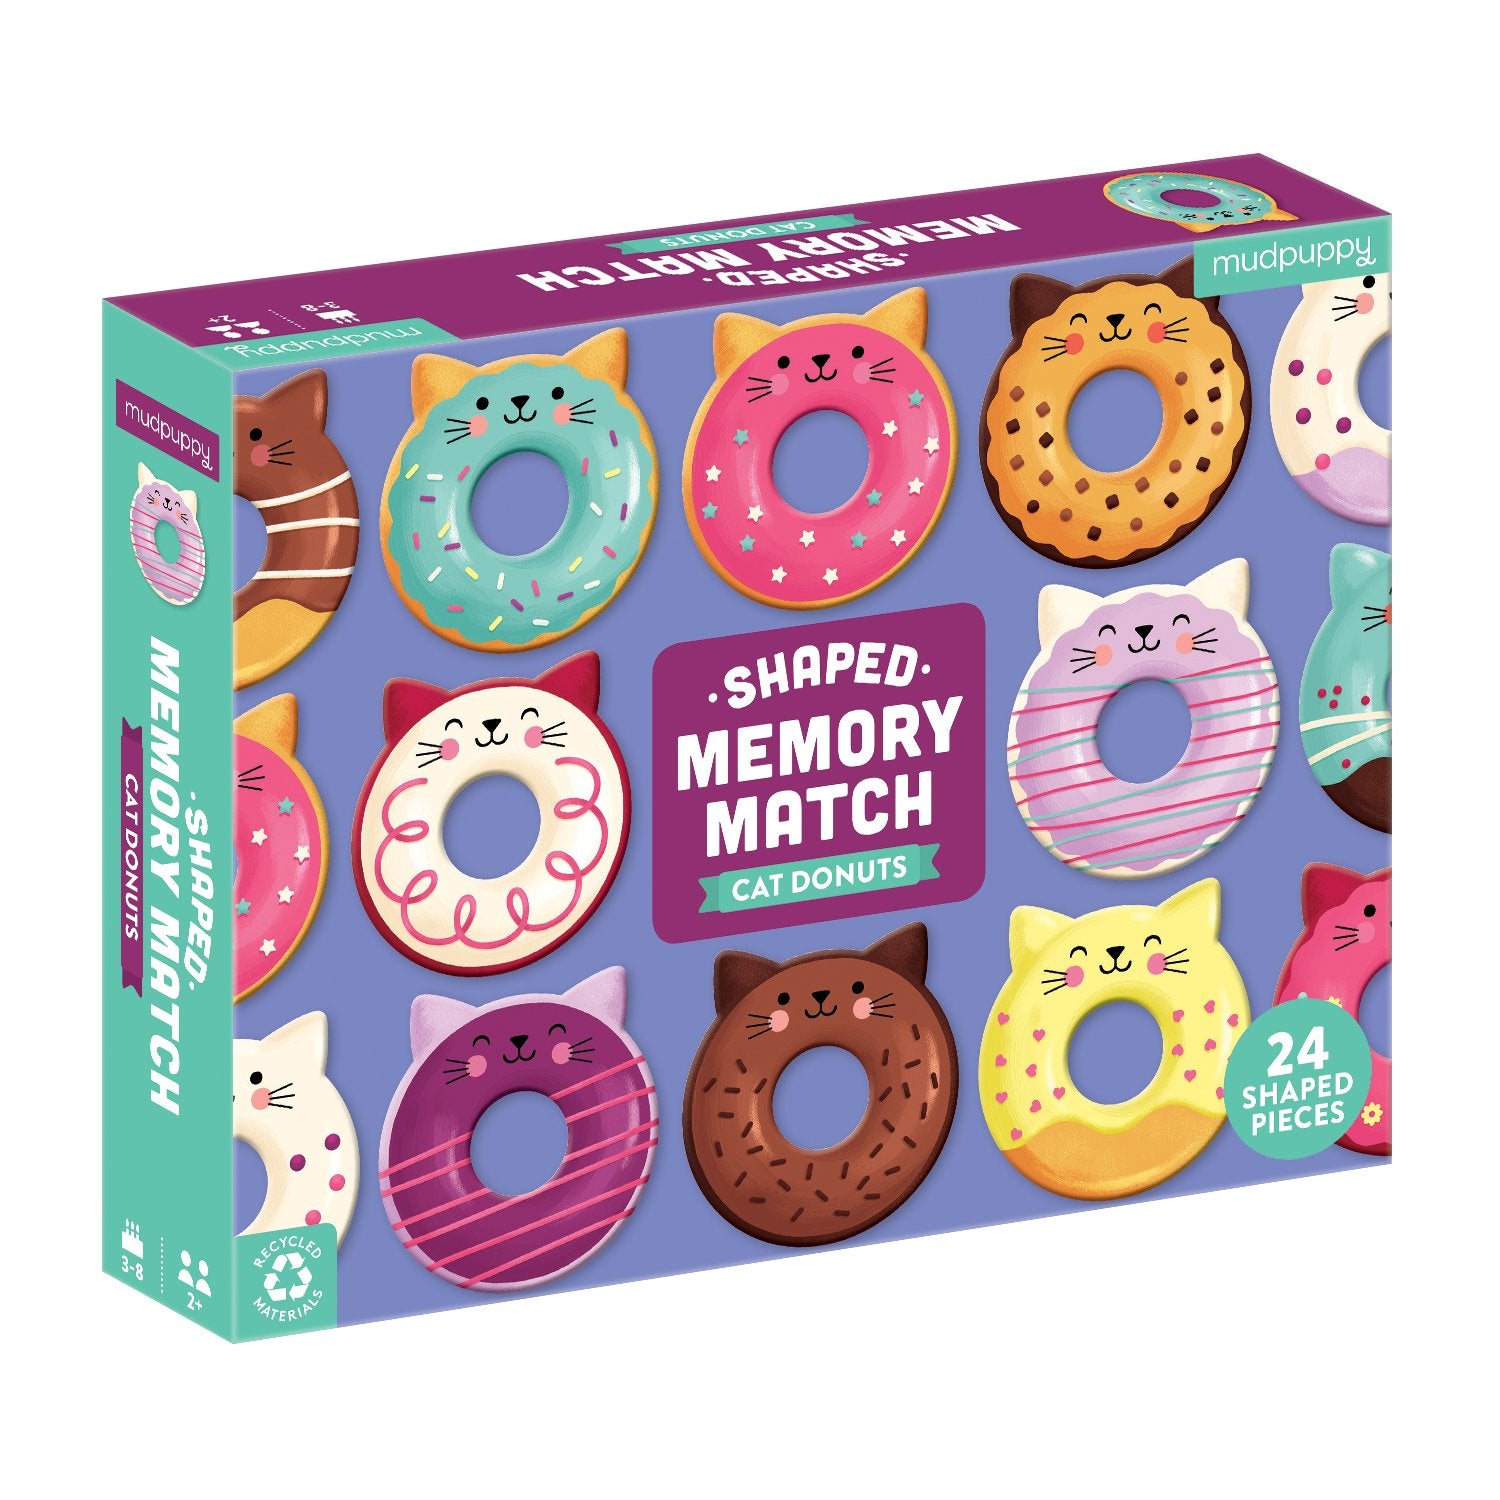 Cat Donuts - Shaped Memory match